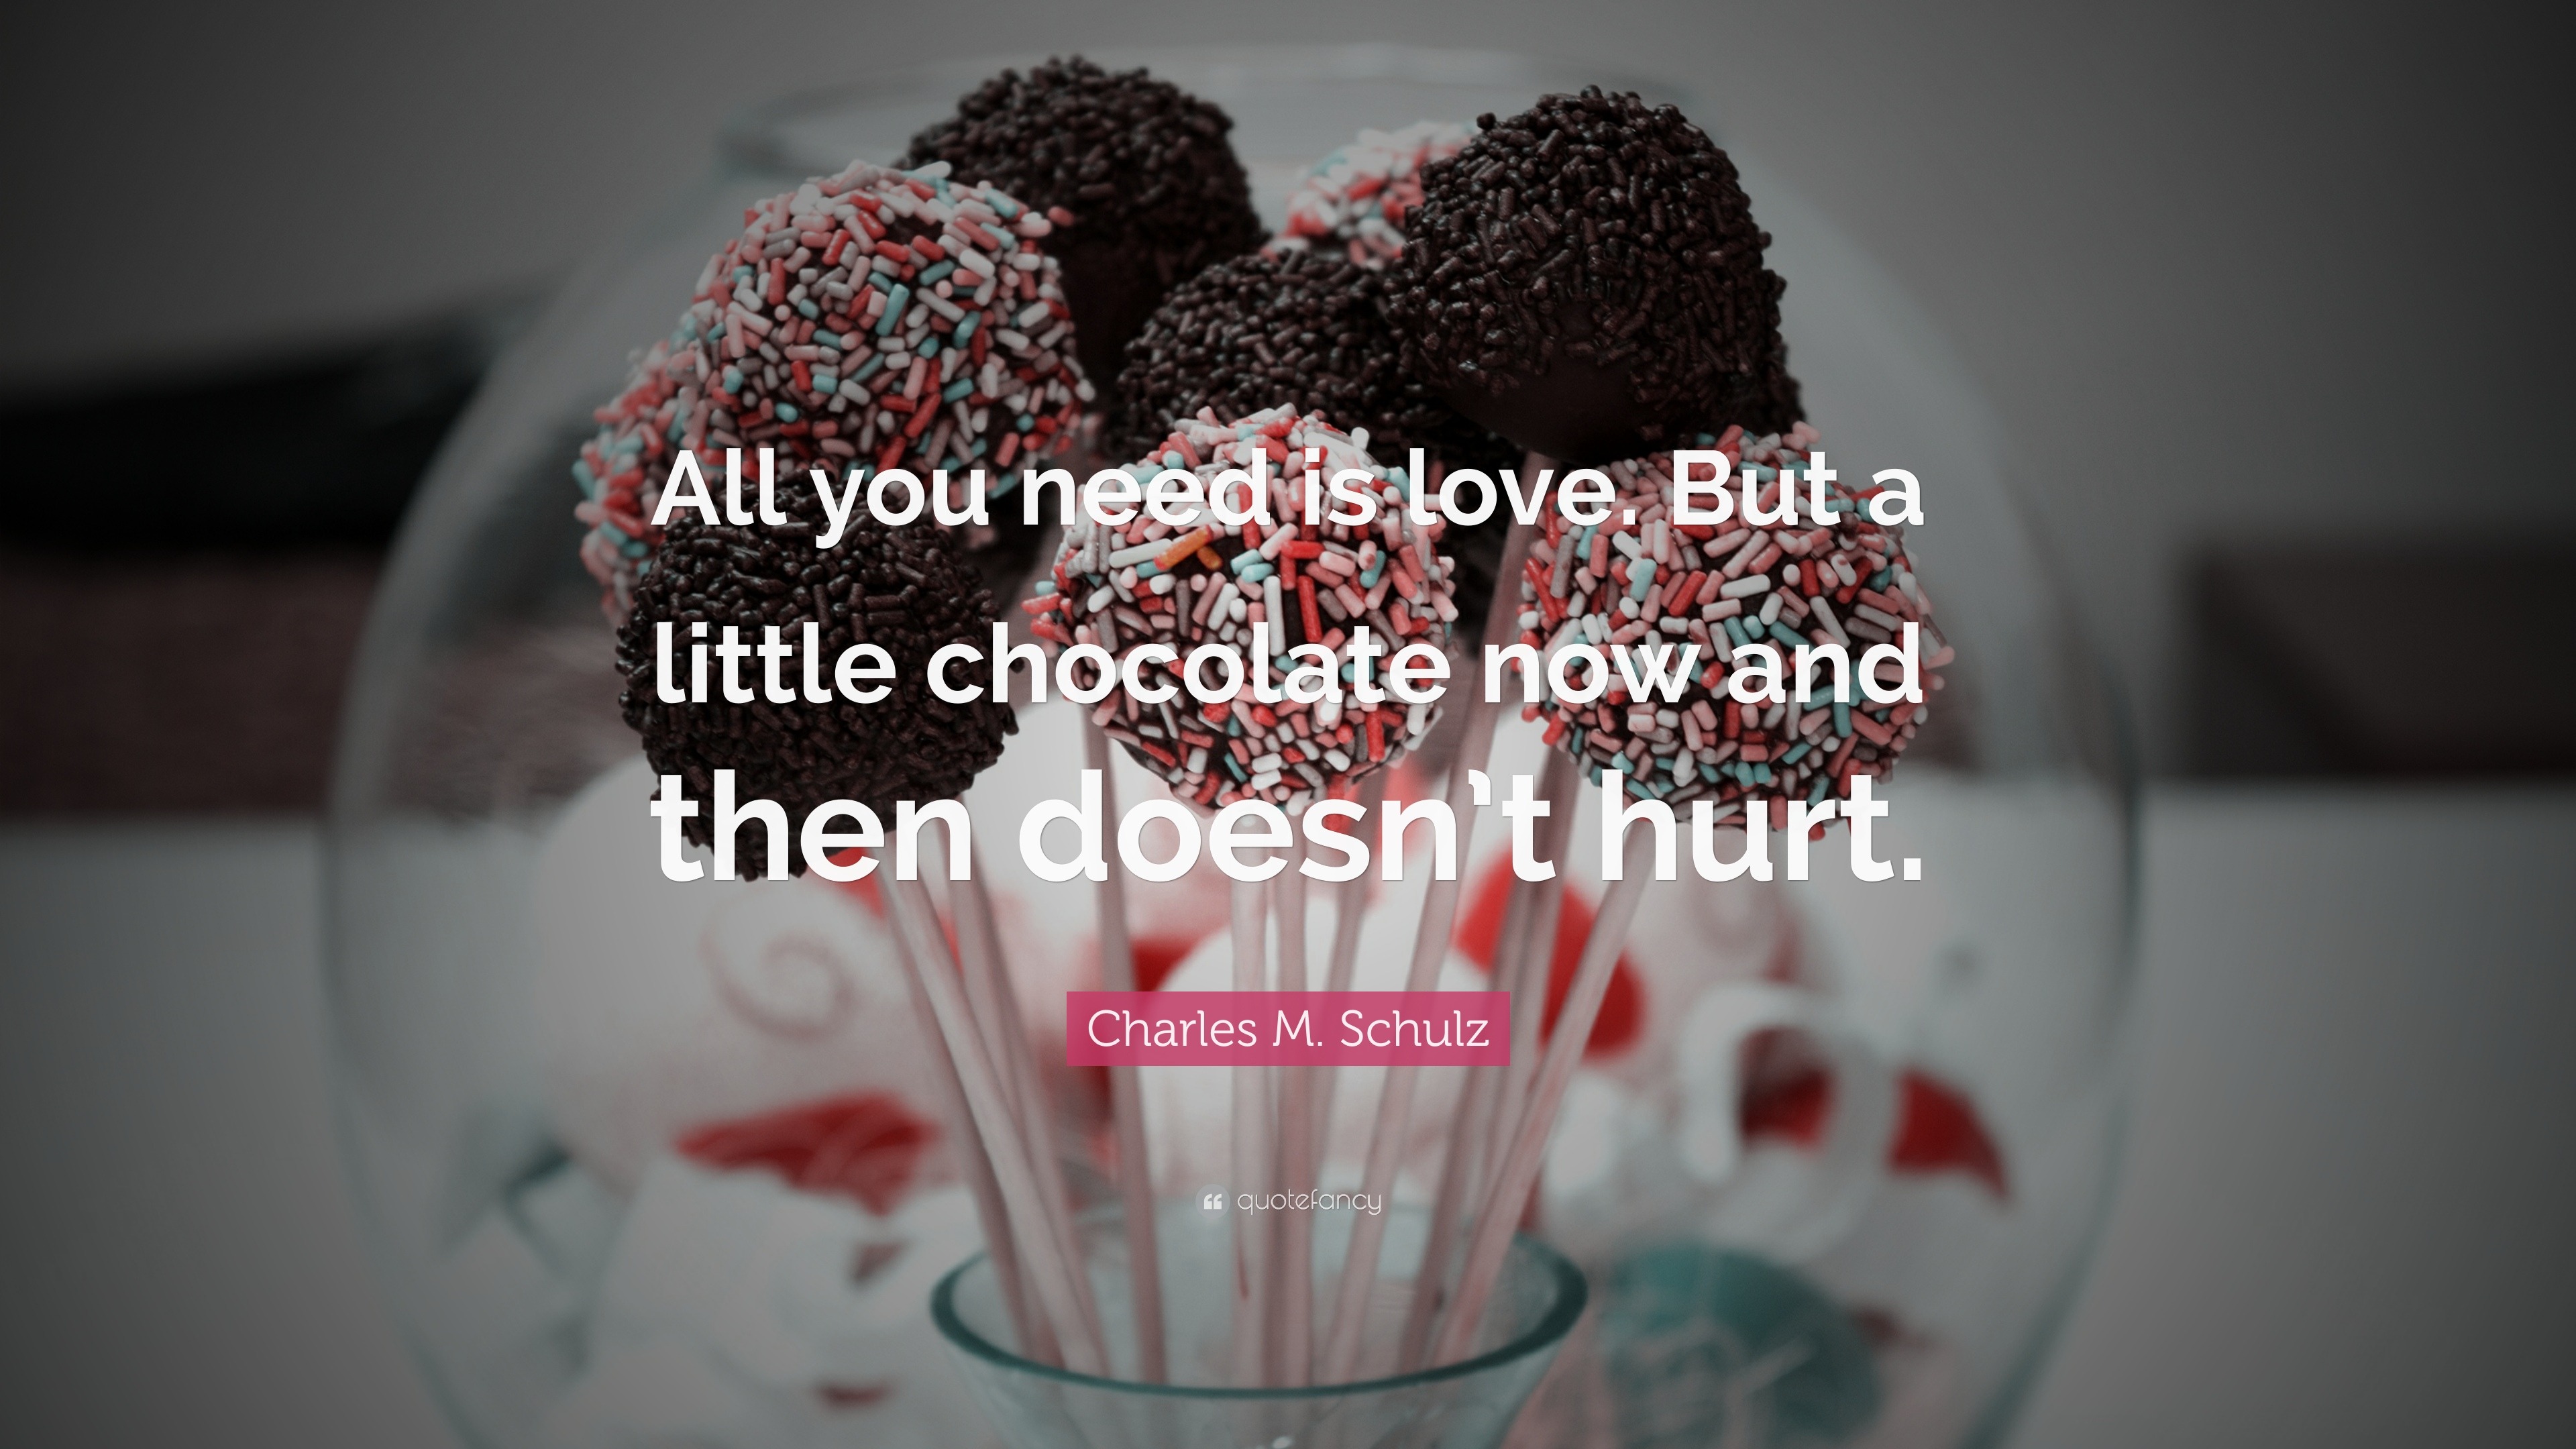 National Chocolate Day Quotes “All you need is love But a little chocolate